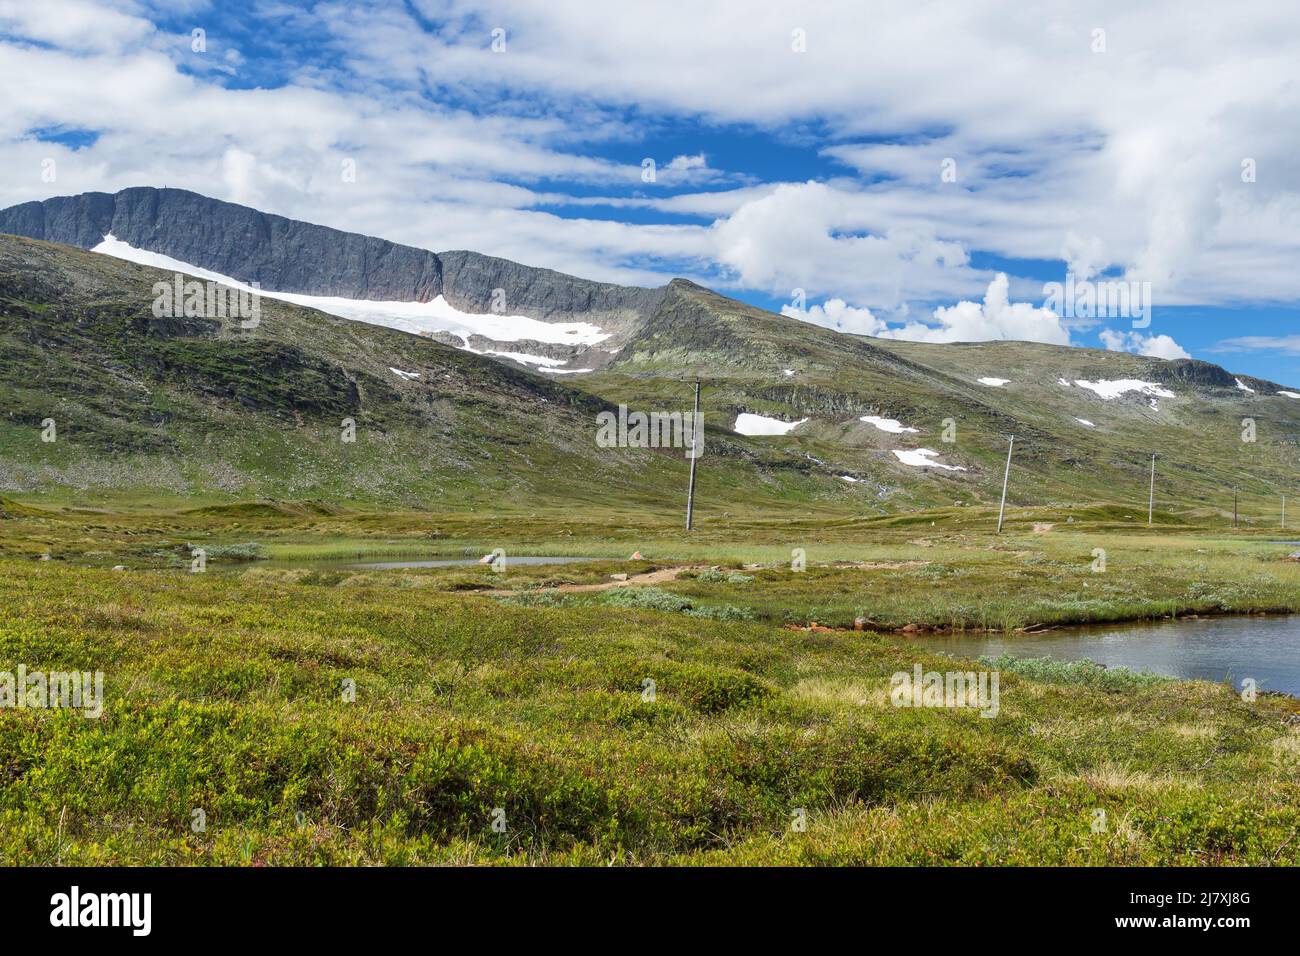 View of Helags mountain peak with a small glacier in Sweden Stock Photo